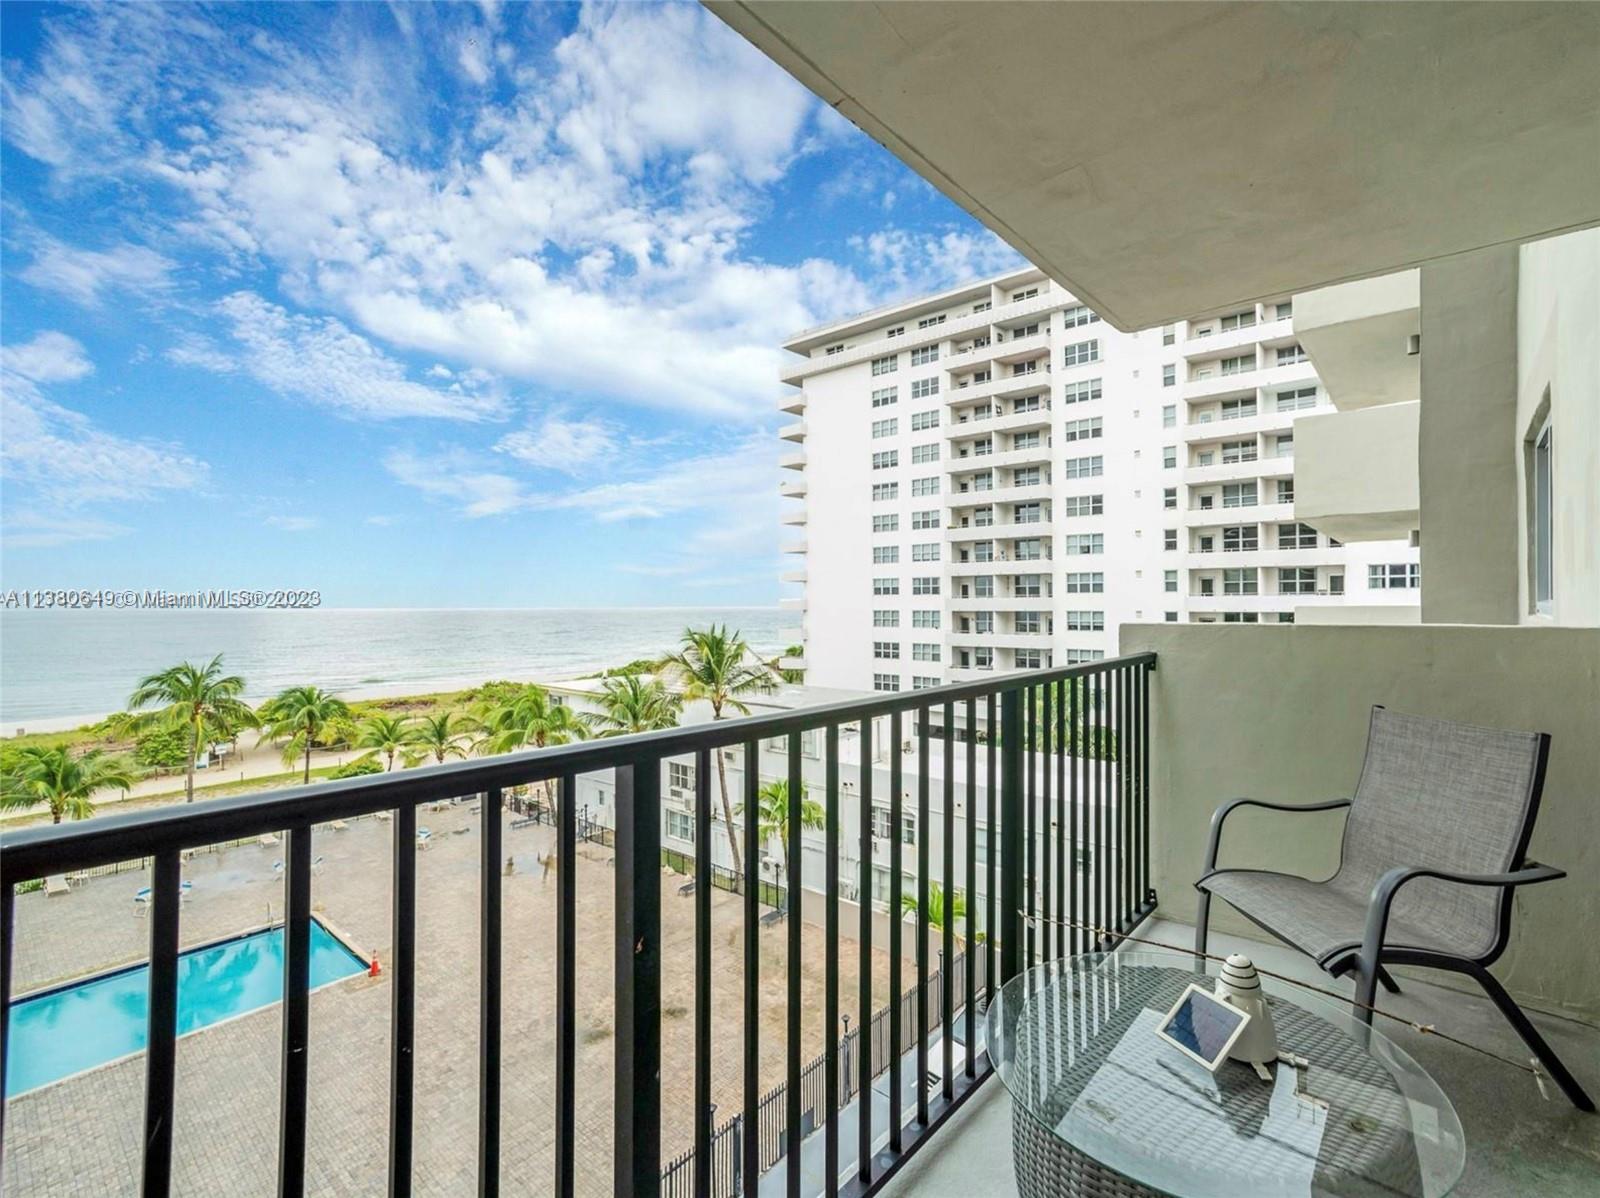 Beautiful ocean view, well maintained unit in the Manatee condominium, Surfside. Remodeled kitchen a